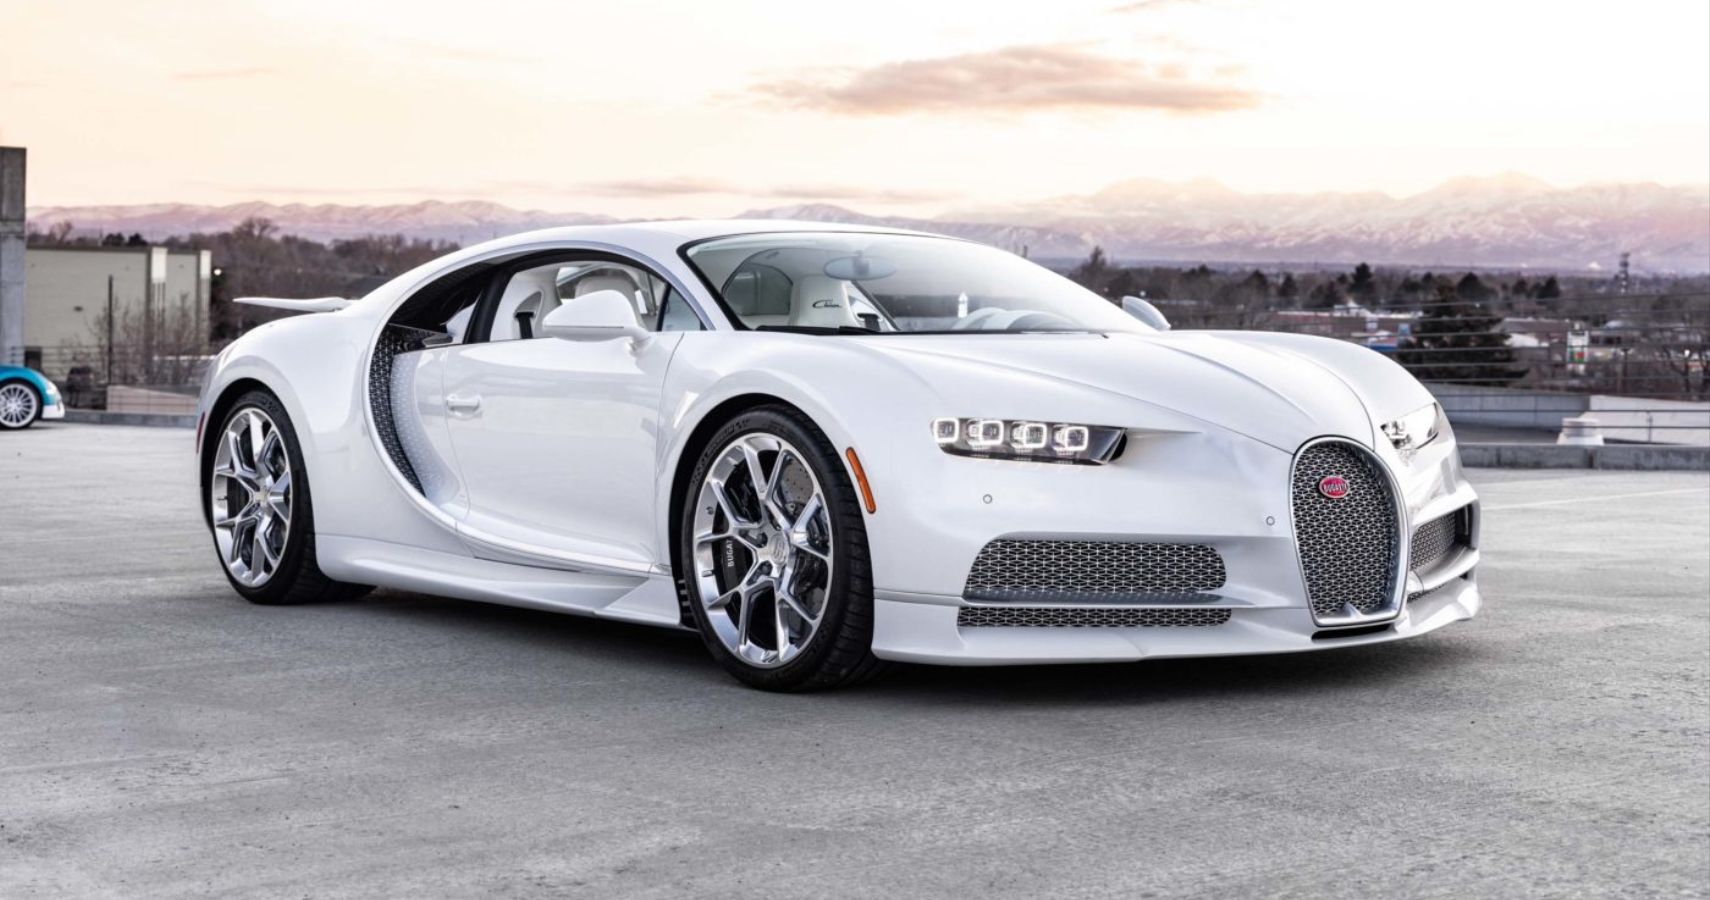 White Bugatti Chiron owned by Post Malone for sale at auction